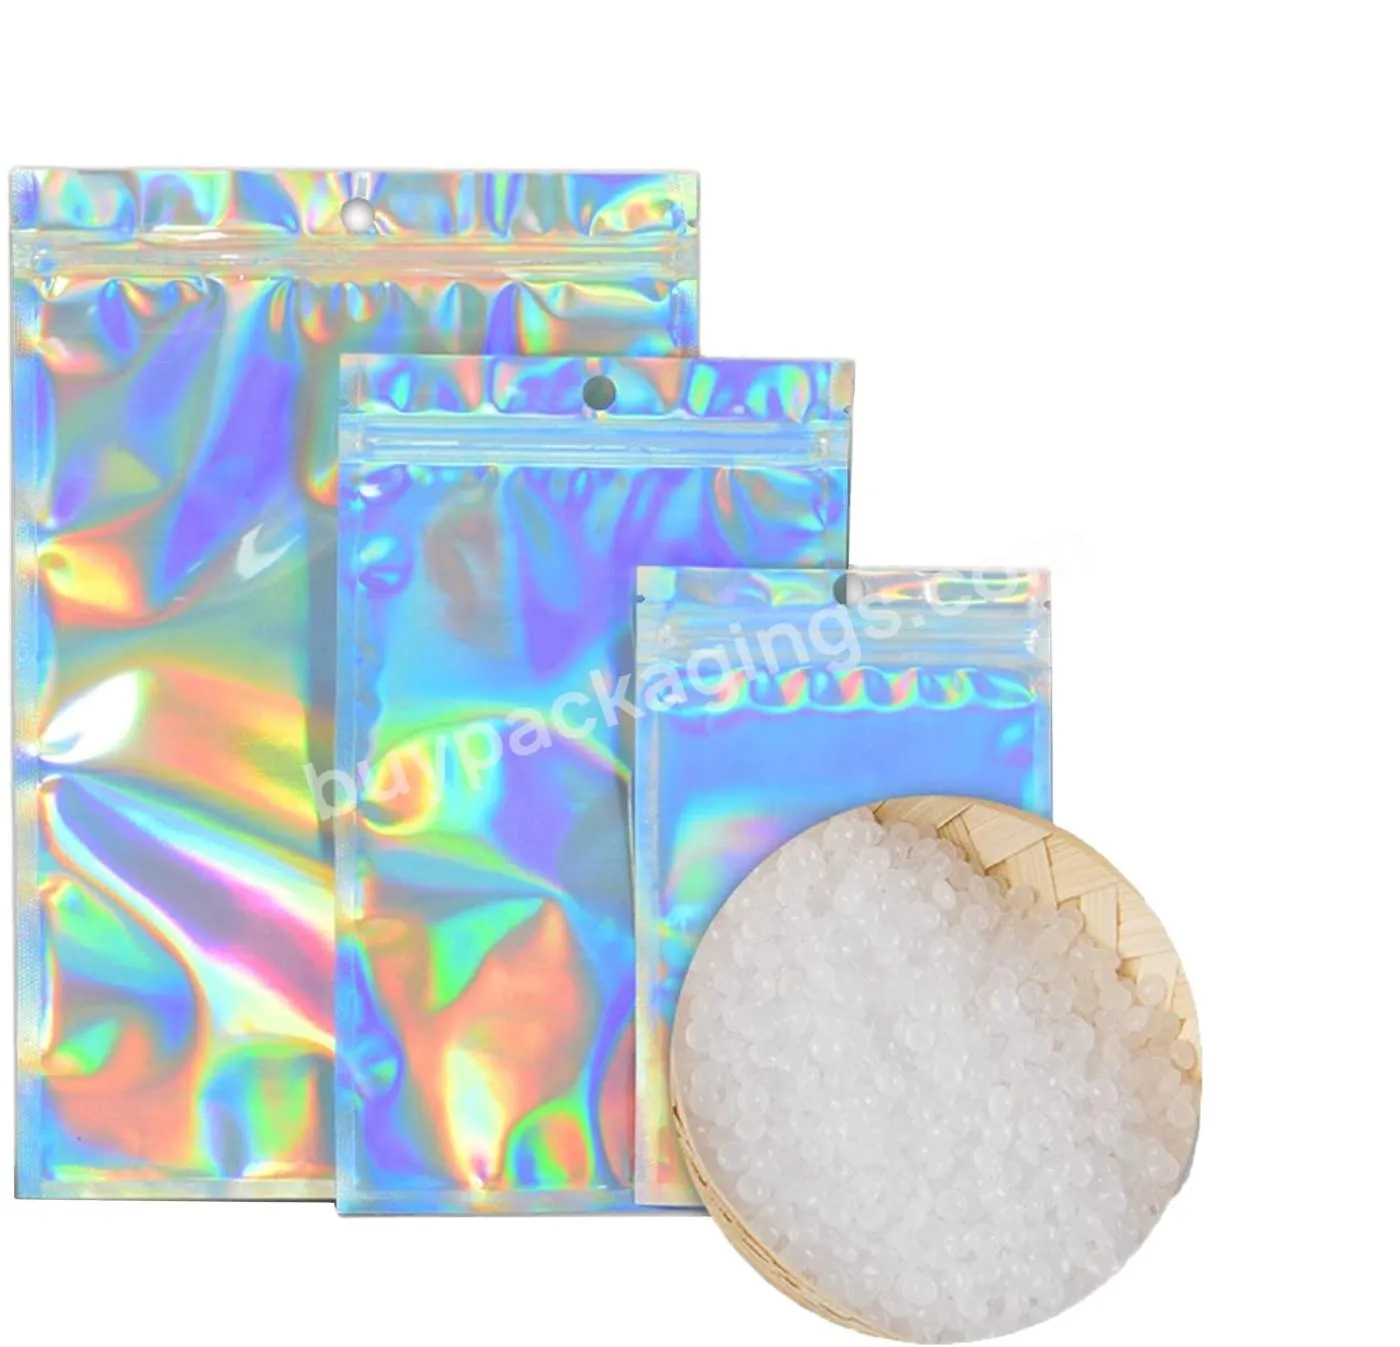 Holographic Foil Ziplock Bags Resealable Mylar Sample Pouch Gift Baggies For Packaging Candy Jewelry Lash Lip Gloss